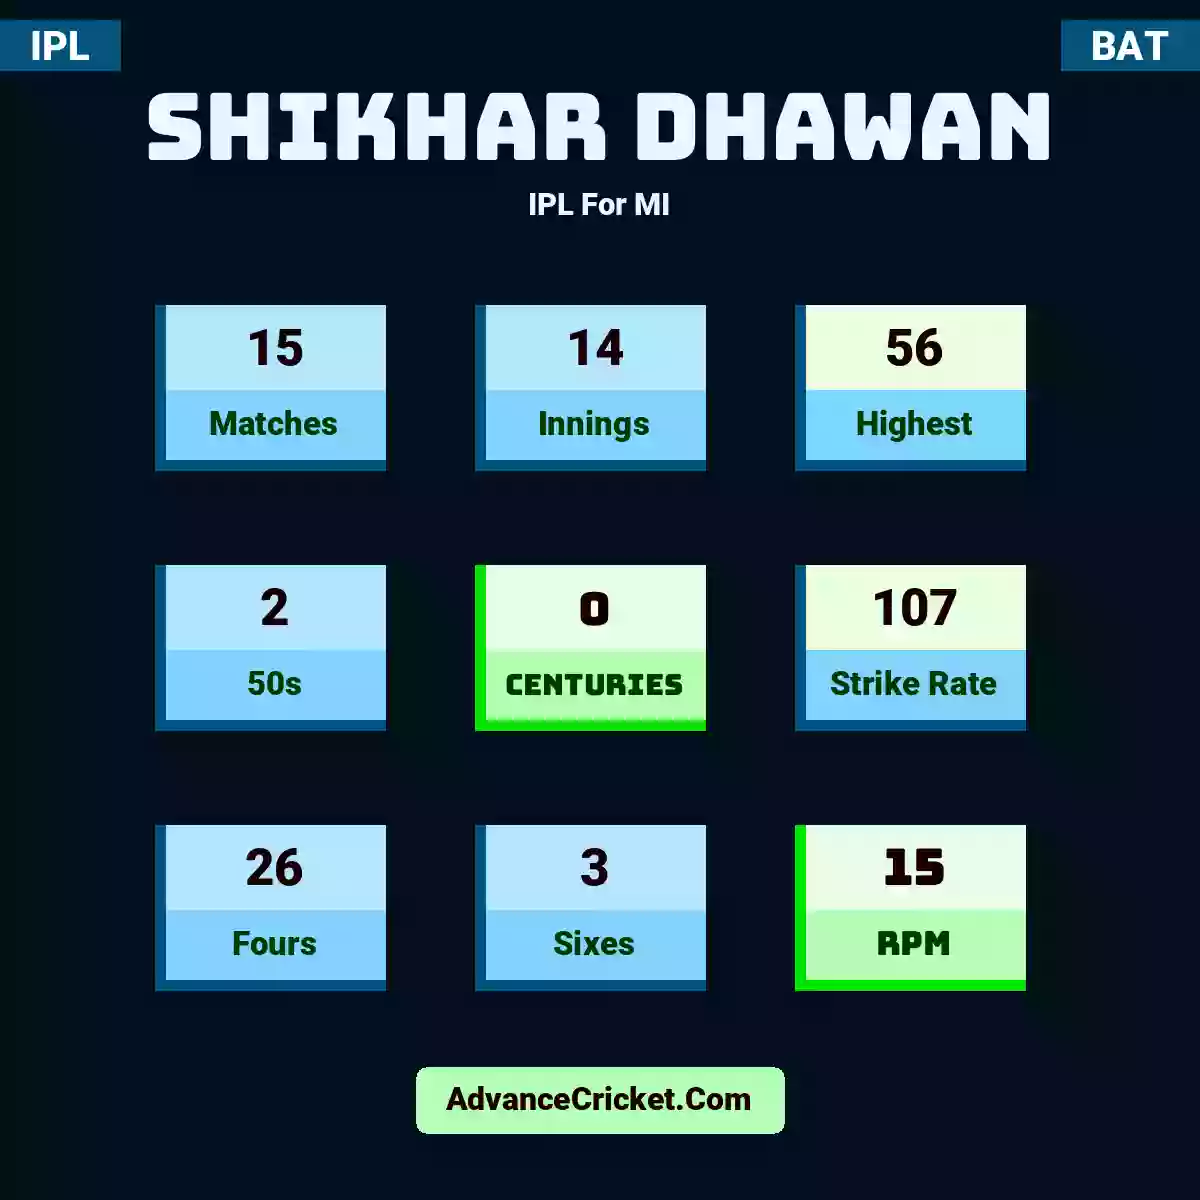 Shikhar Dhawan IPL  For MI, Shikhar Dhawan played 15 matches, scored 56 runs as highest, 2 half-centuries, and 0 centuries, with a strike rate of 107. S.Dhawan hit 26 fours and 3 sixes, with an RPM of 15.